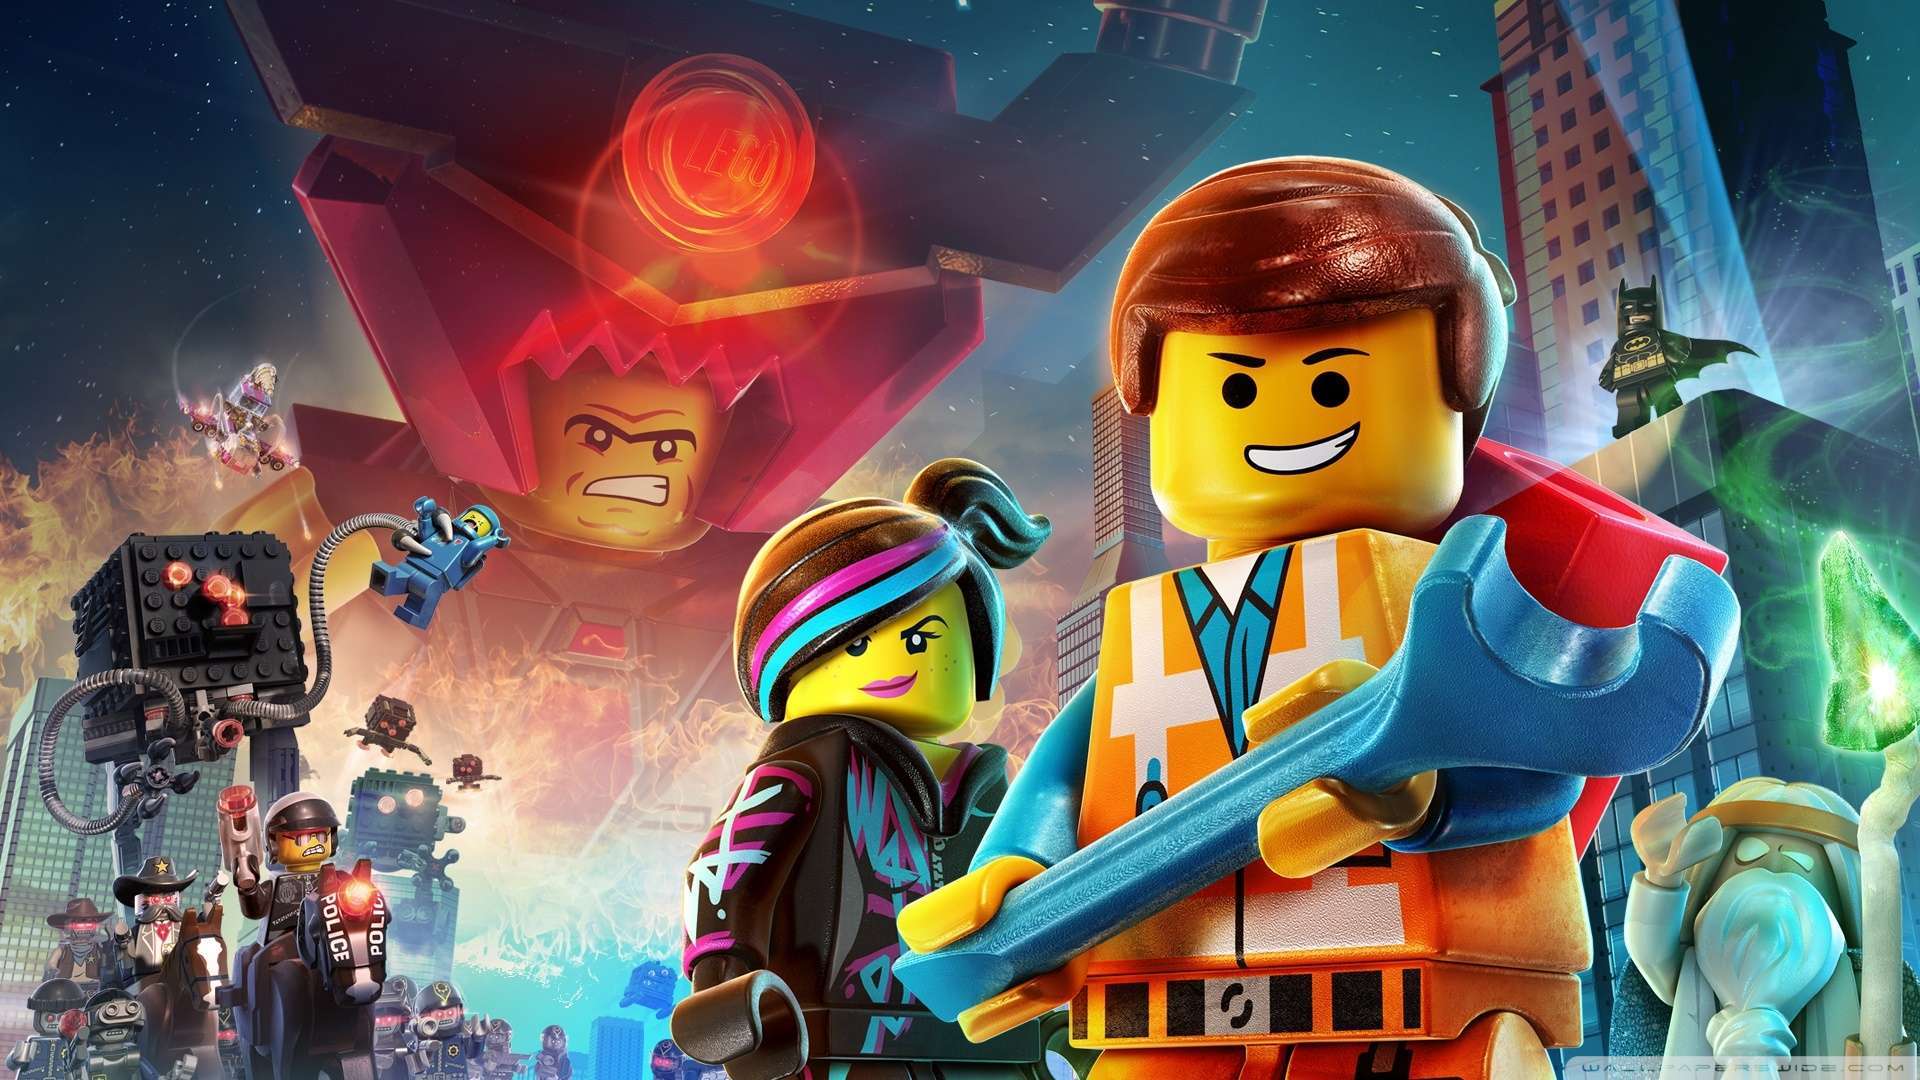 Wallpaper The Lego Movie 2015 Wallpaper 1080p HD Upload at February